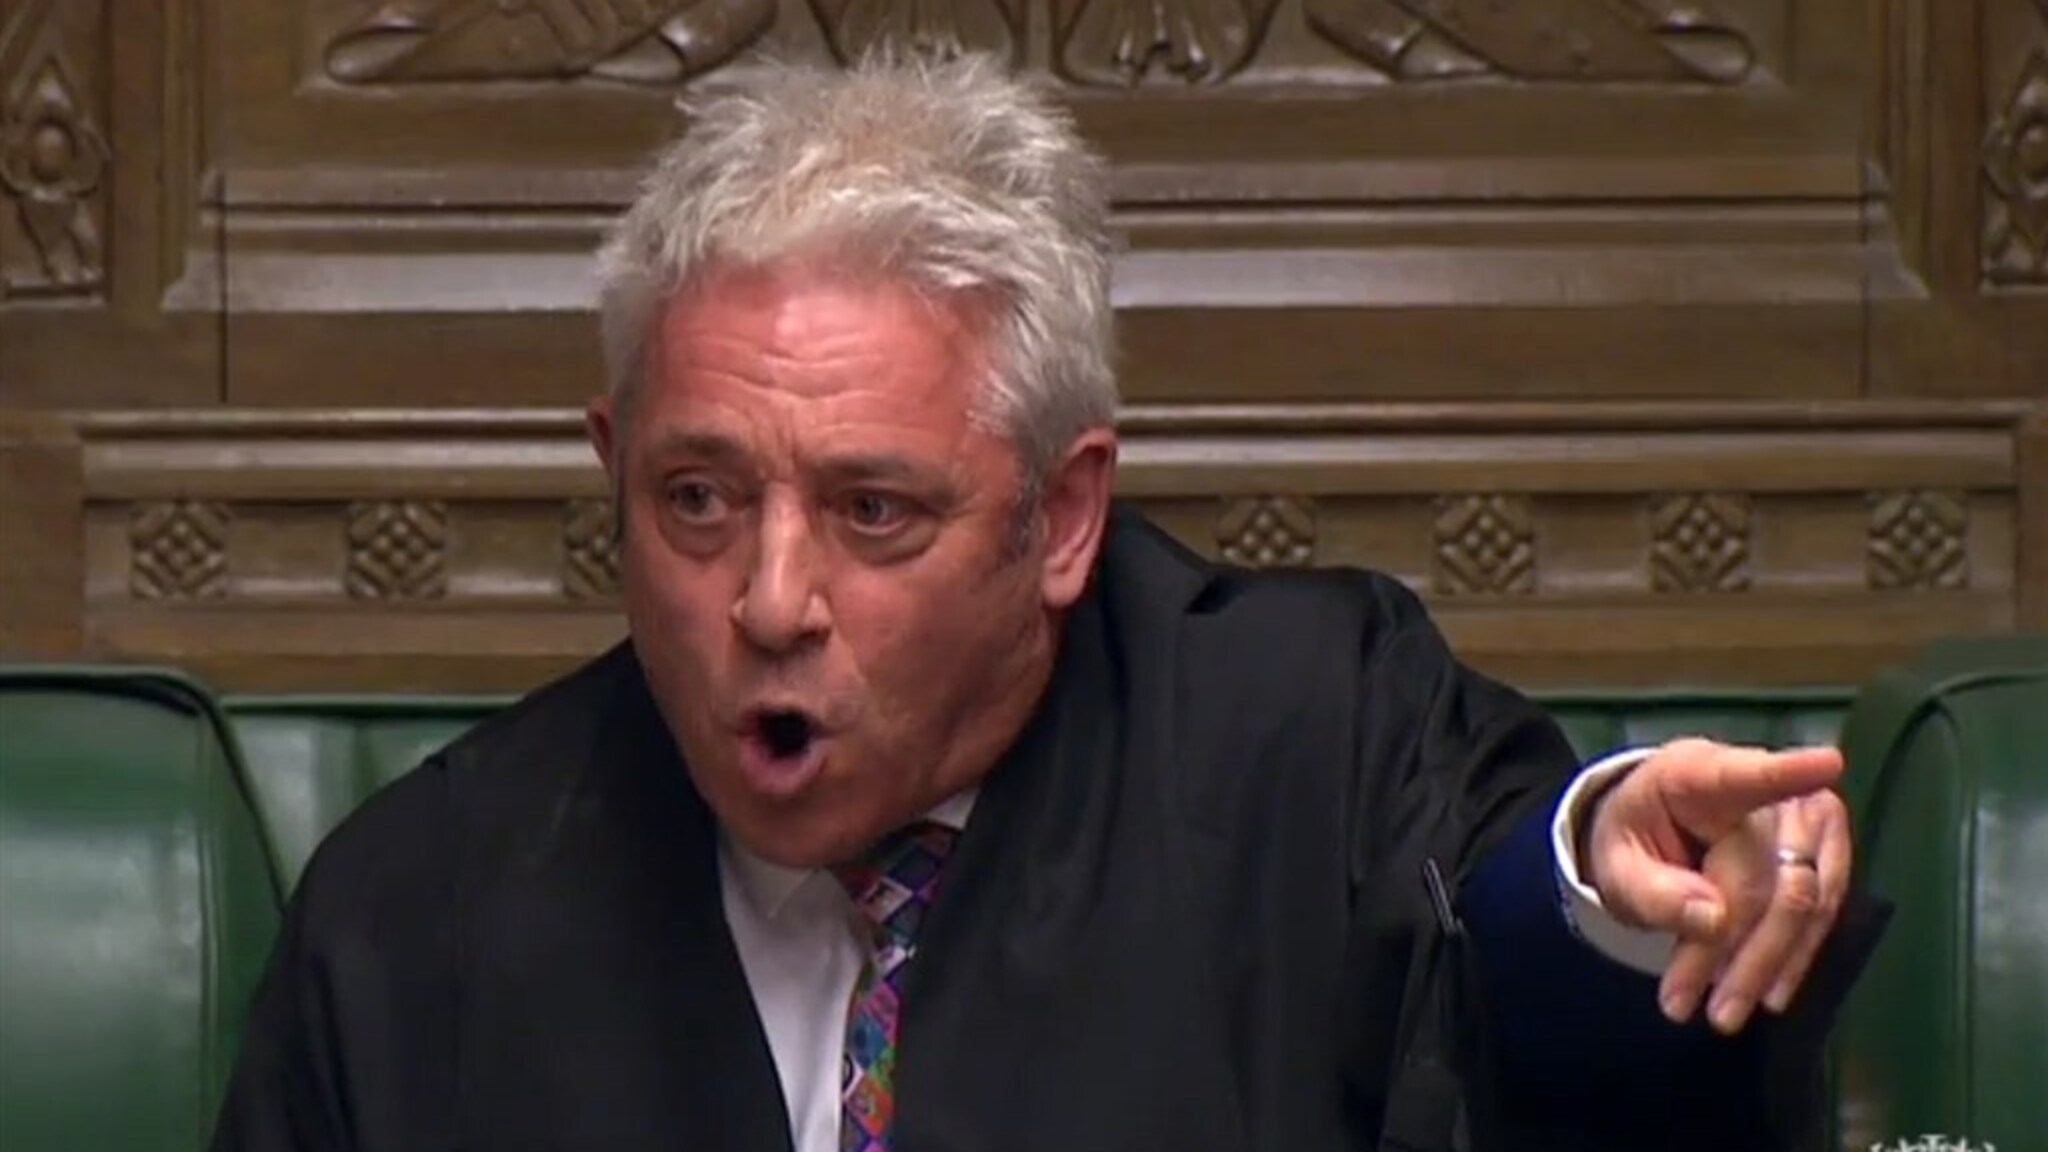 Investigation: Former Speaker of the British House of Commons John 'Orderrrrr' Bercow was a tyrant